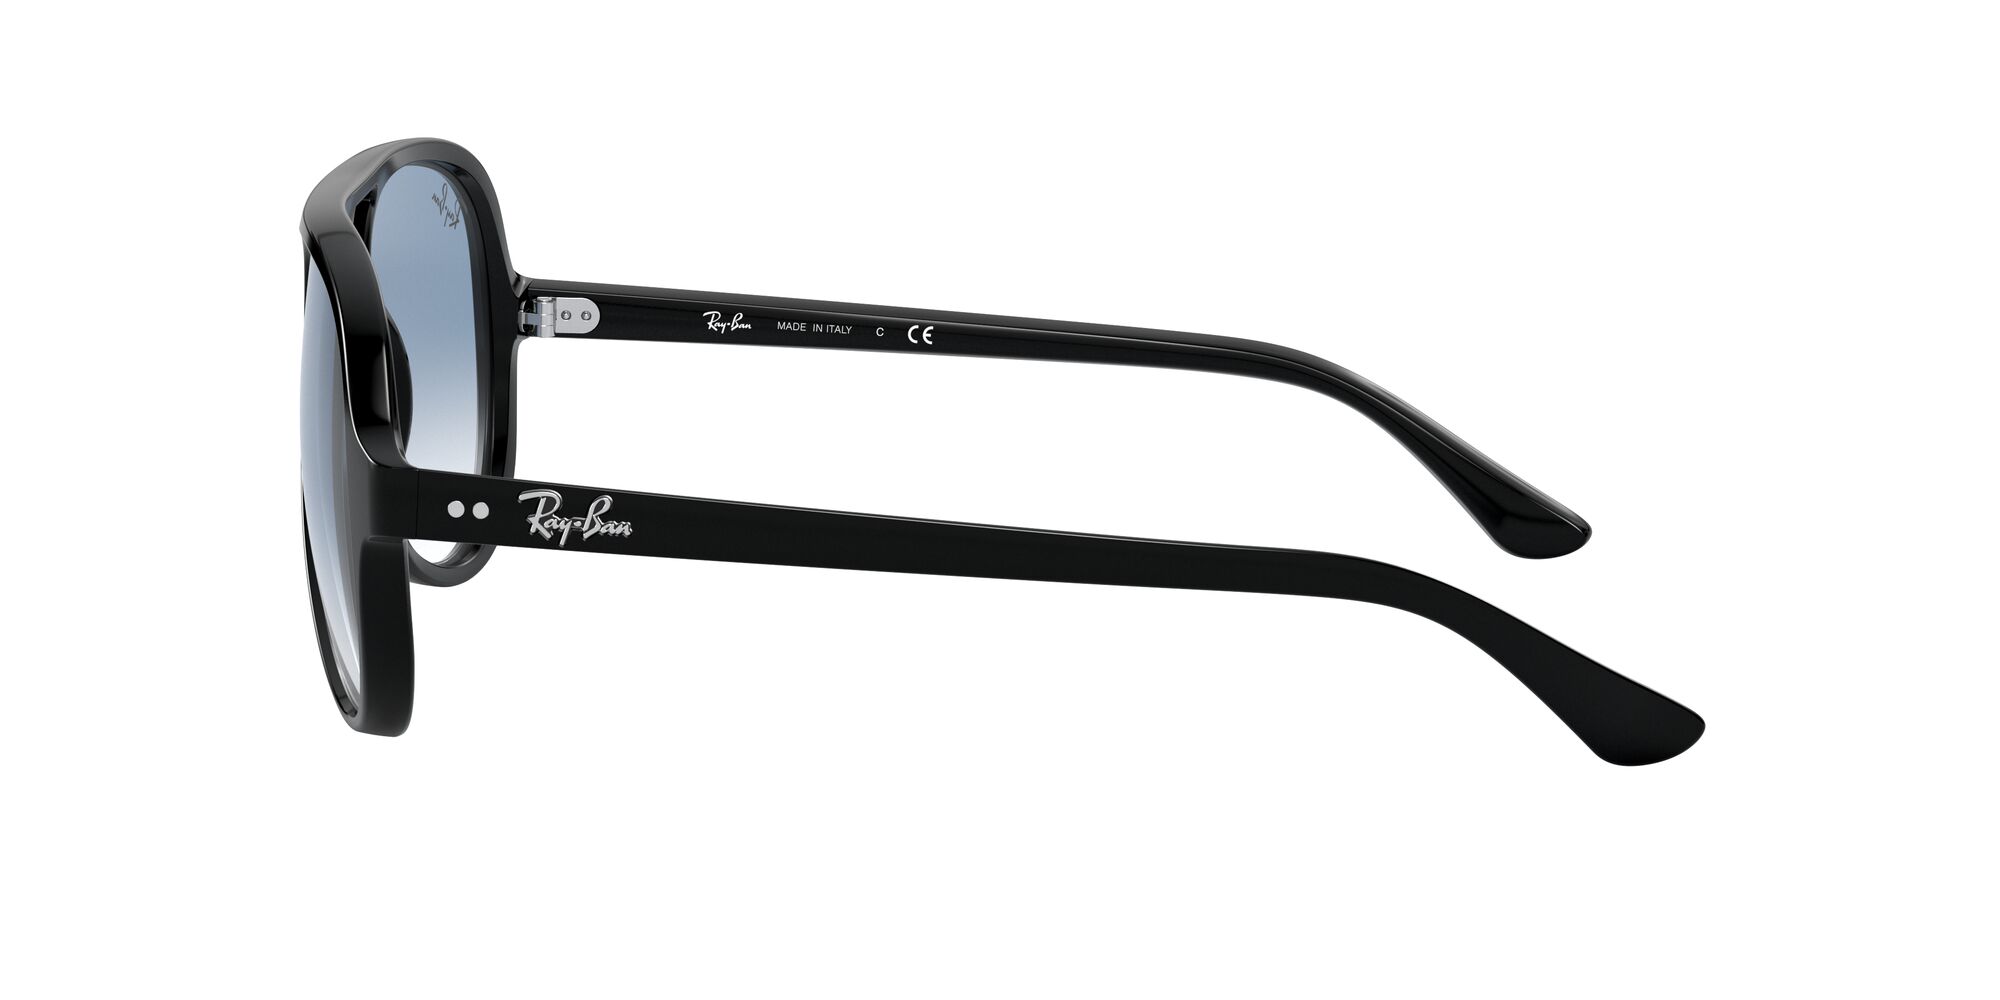 Ray-Ban RB4125 Cats 5000 Sunglasses - image 4 of 12